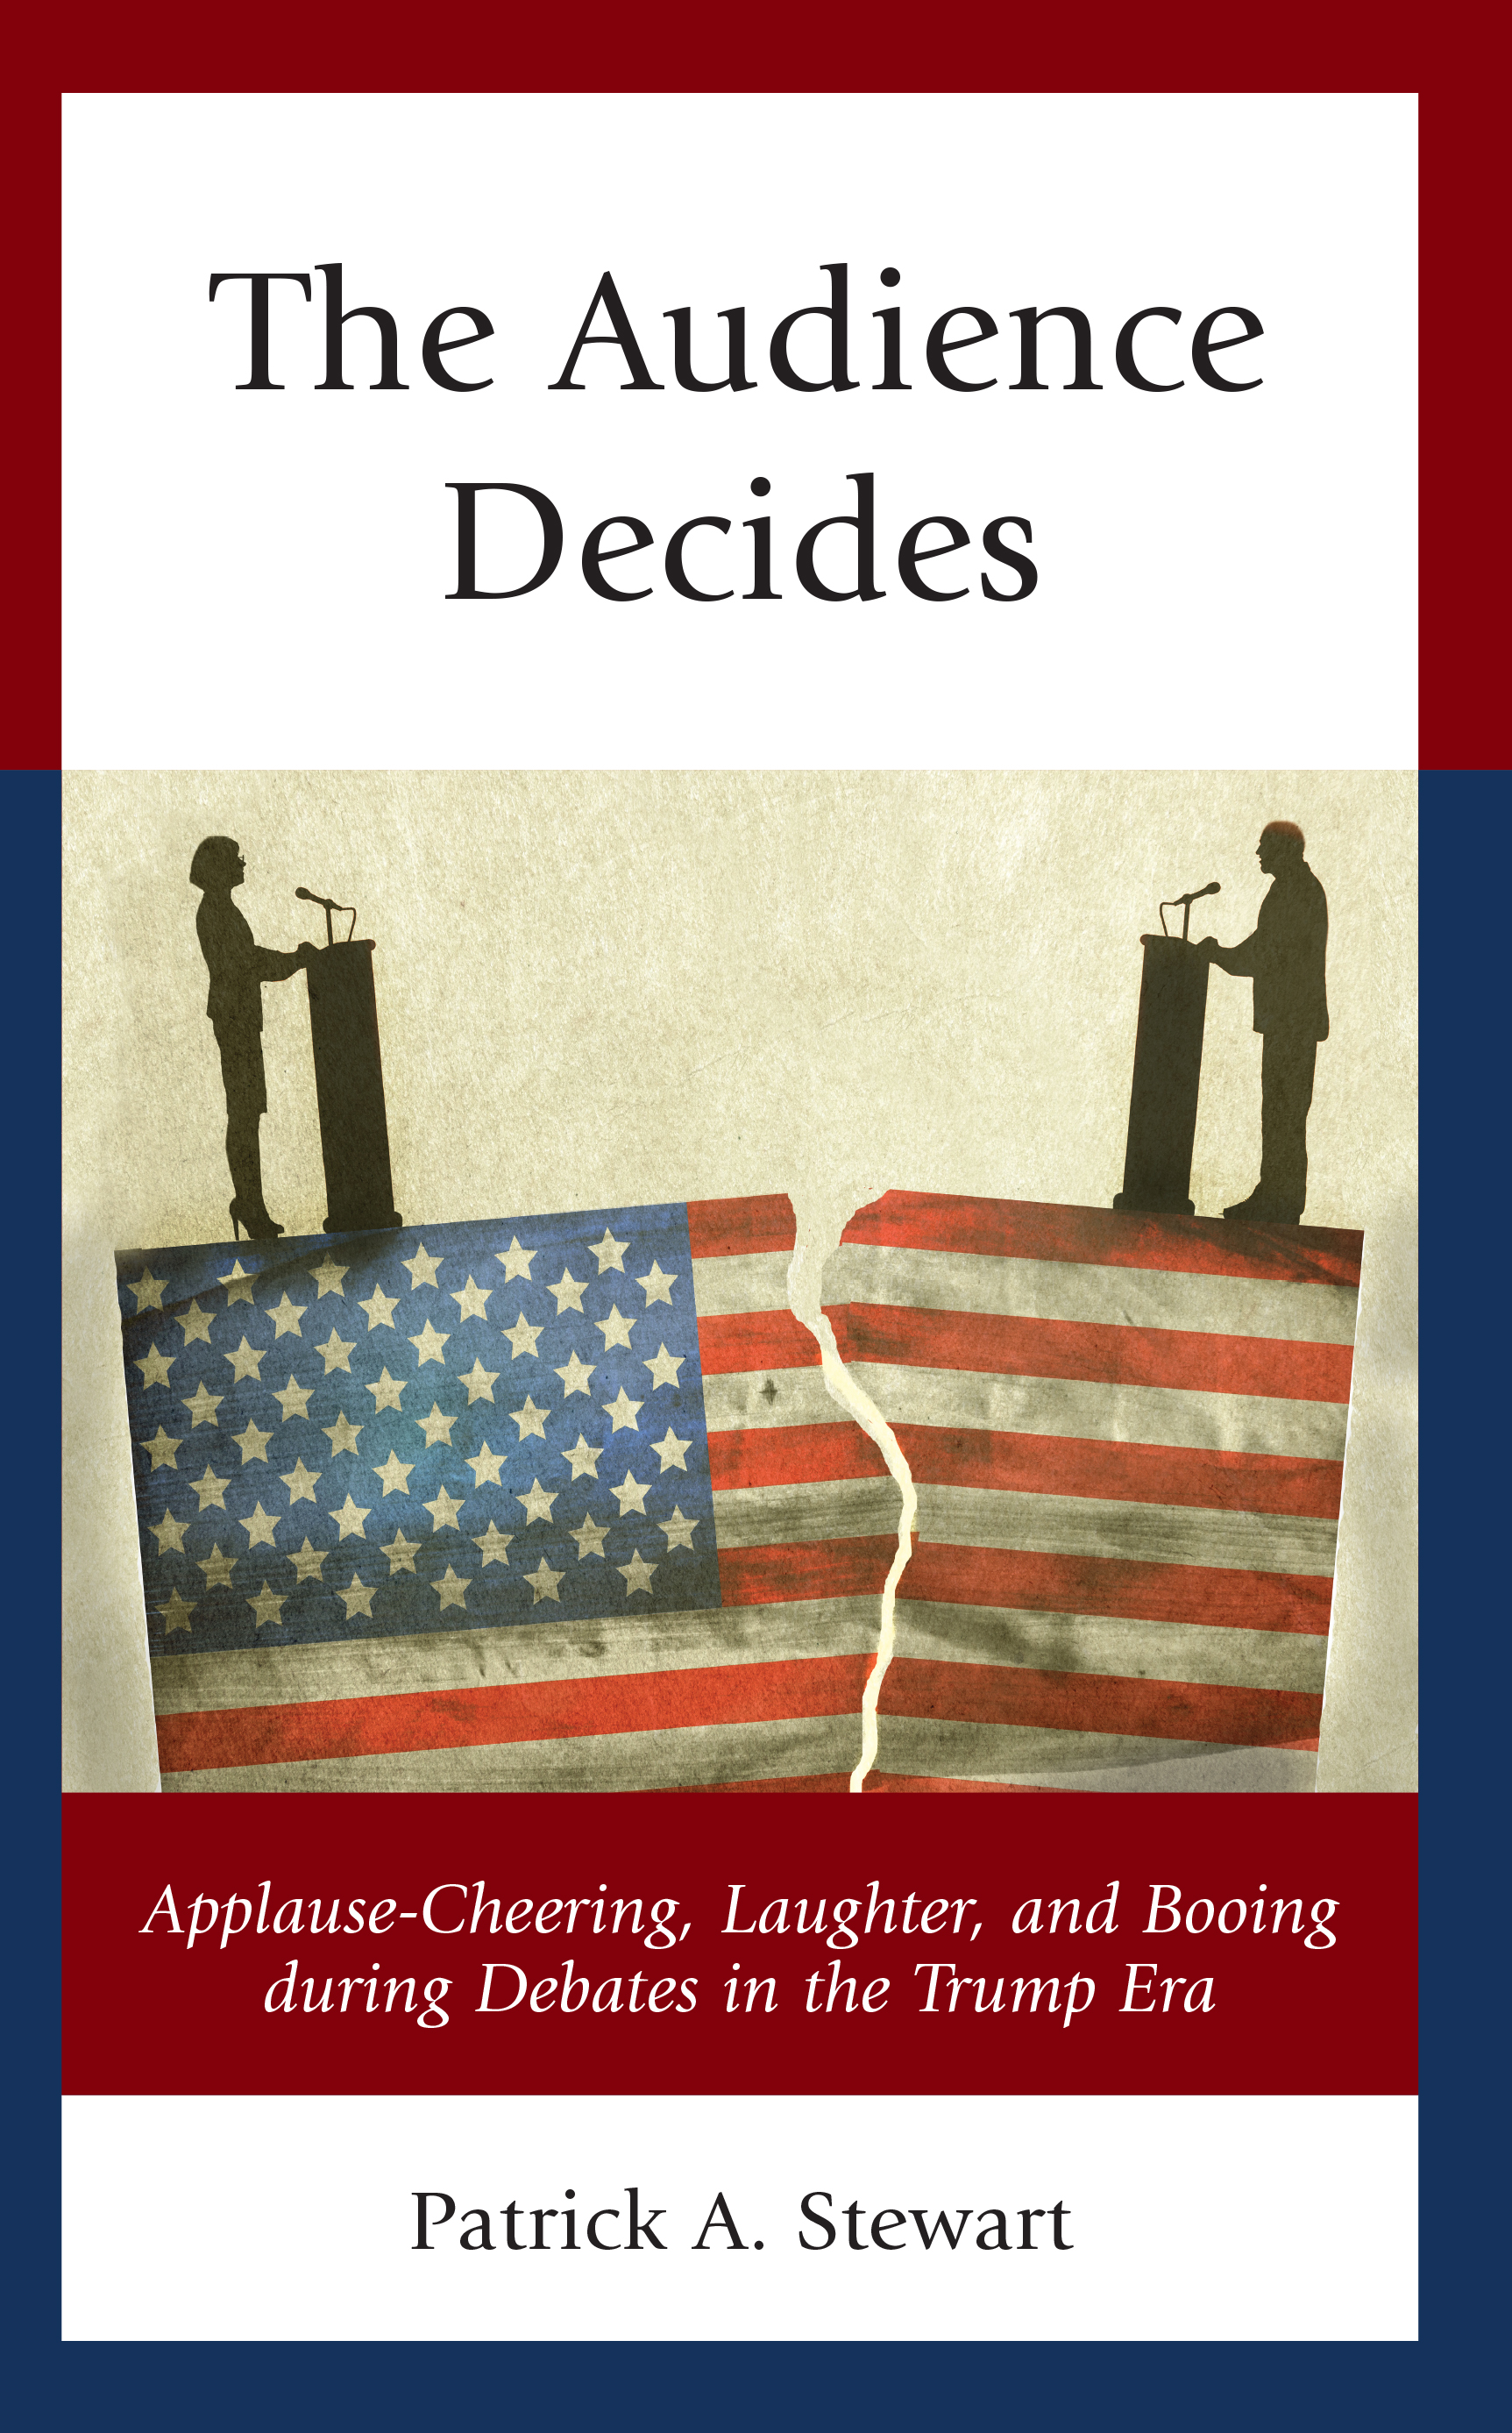 The Audience Decides: Applause-Cheering, Laughter, and Booing during Debates in the Trump Era